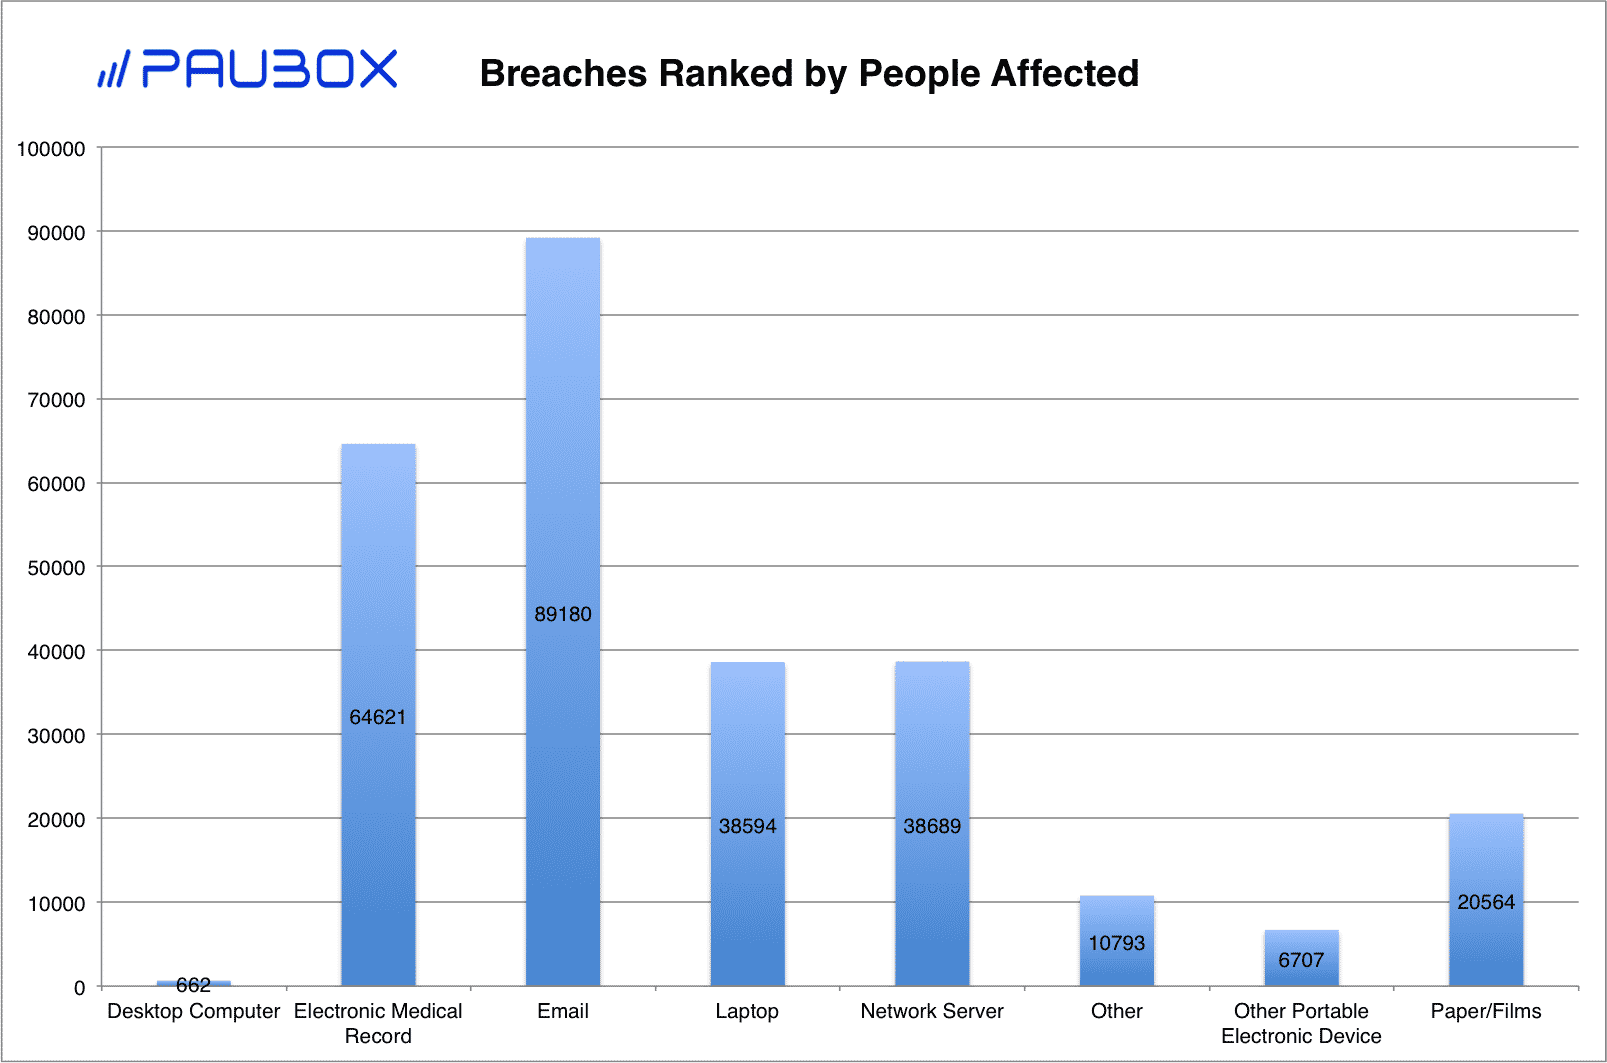 Paubox HIPAA Breach Report: April 2018 - Breaches Ranked by People Affected